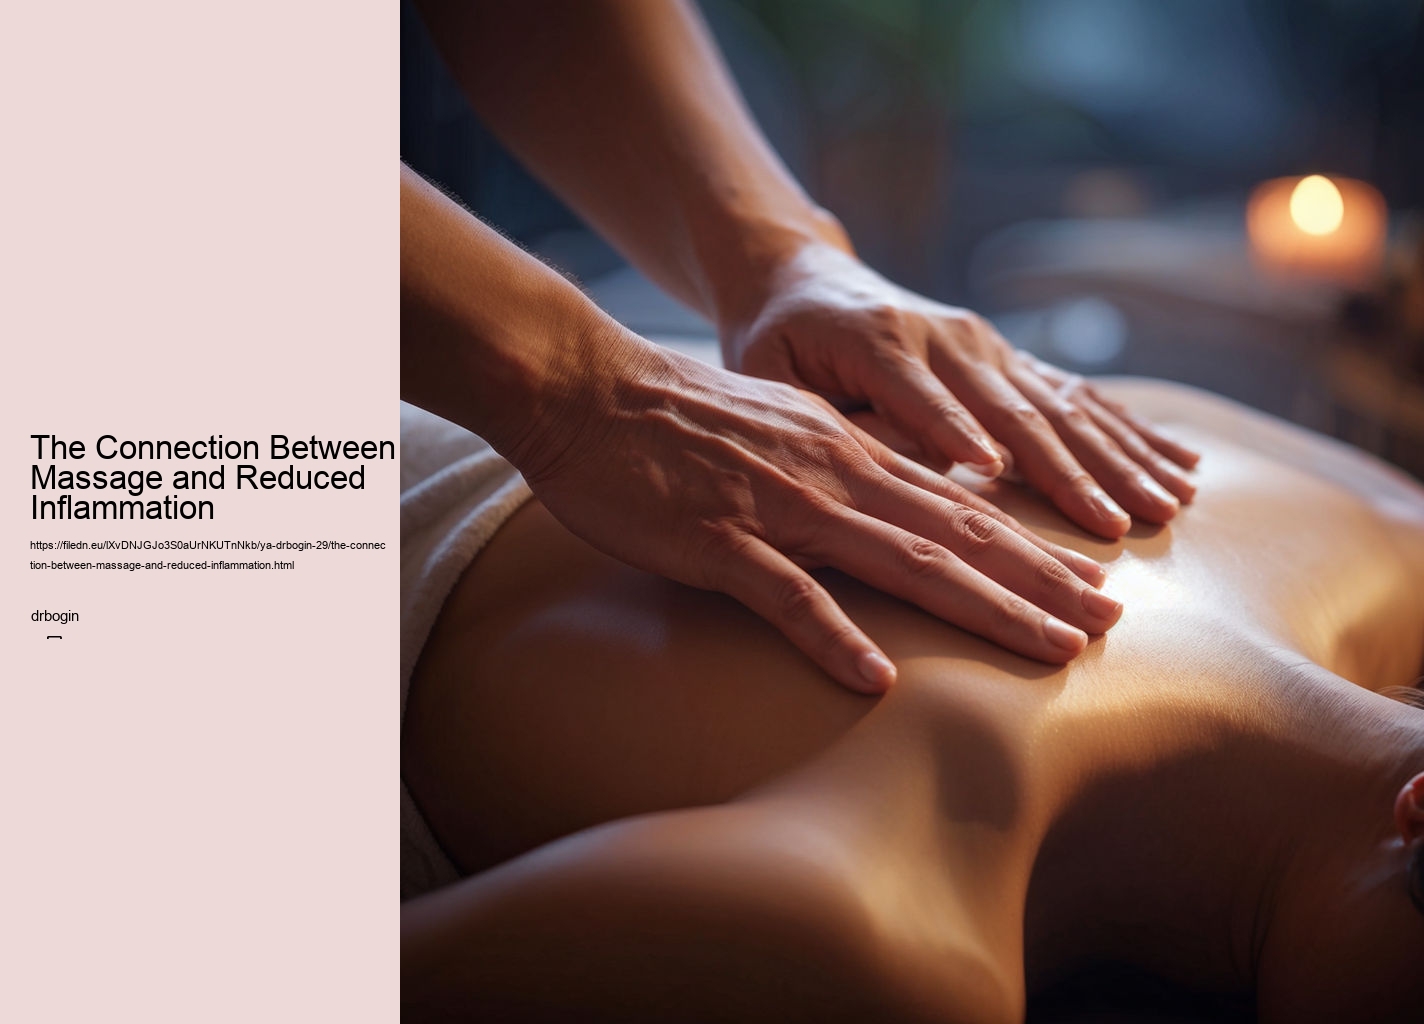 The Connection Between Massage and Reduced Inflammation